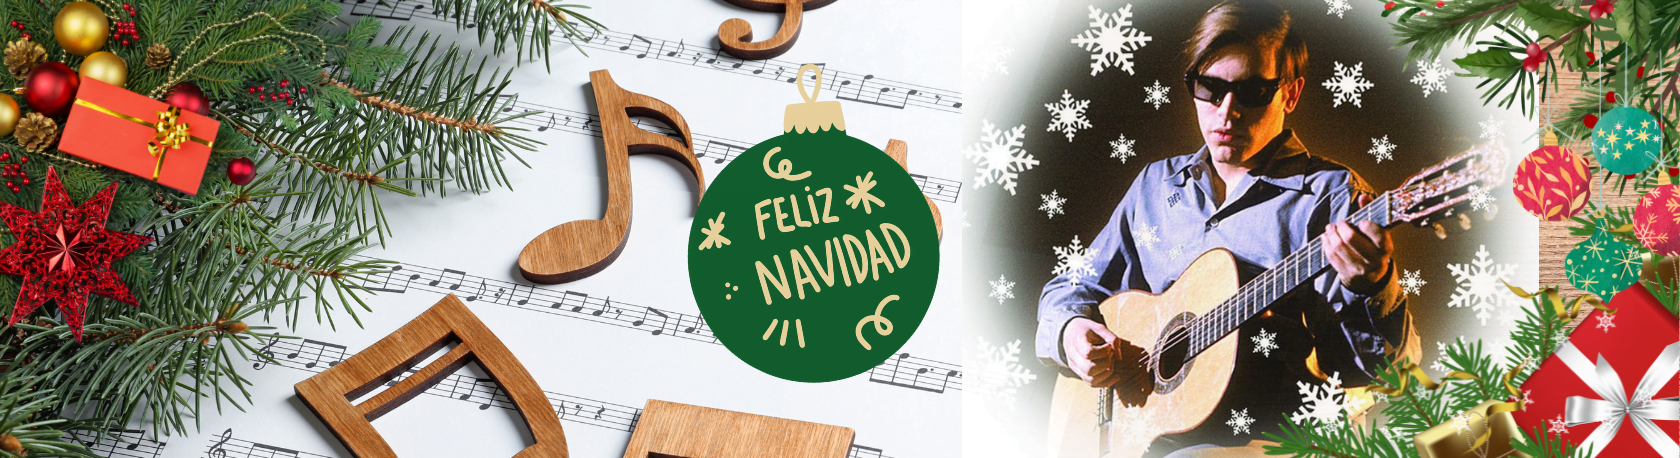 Improve your Spanish vocabulary & listening skills while learning about one of the most popular Christmas songs - Canción Feliz Navidad de José Feliciano - Spanish Podcast - Easy Spanish Podcast - Learn Spanish - Speak Spanish - Practice Spanish - Easy Español